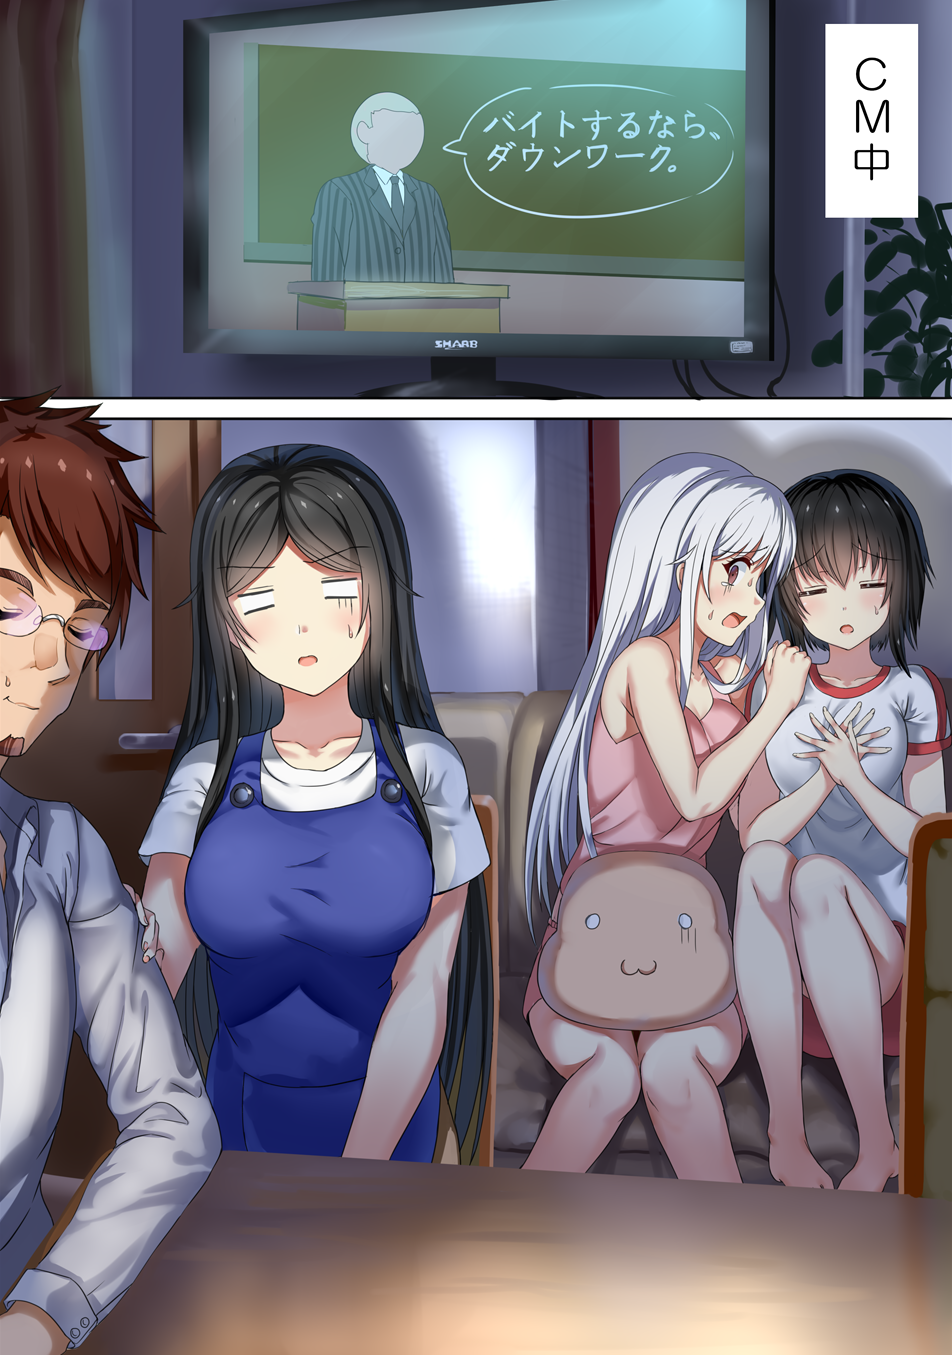 1boy 3girls aldehyde barefoot black_hair blush breasts brown_hair cleavage closed_eyes couch hands_on_own_chest highres long_hair matsumoto_hitoshi multiple_girls neeko neeko's_father neeko's_mother neeko's_sister open_mouth original scared short_hair shorts silver_hair sitting sleeveless sweatdrop tears television watching_television